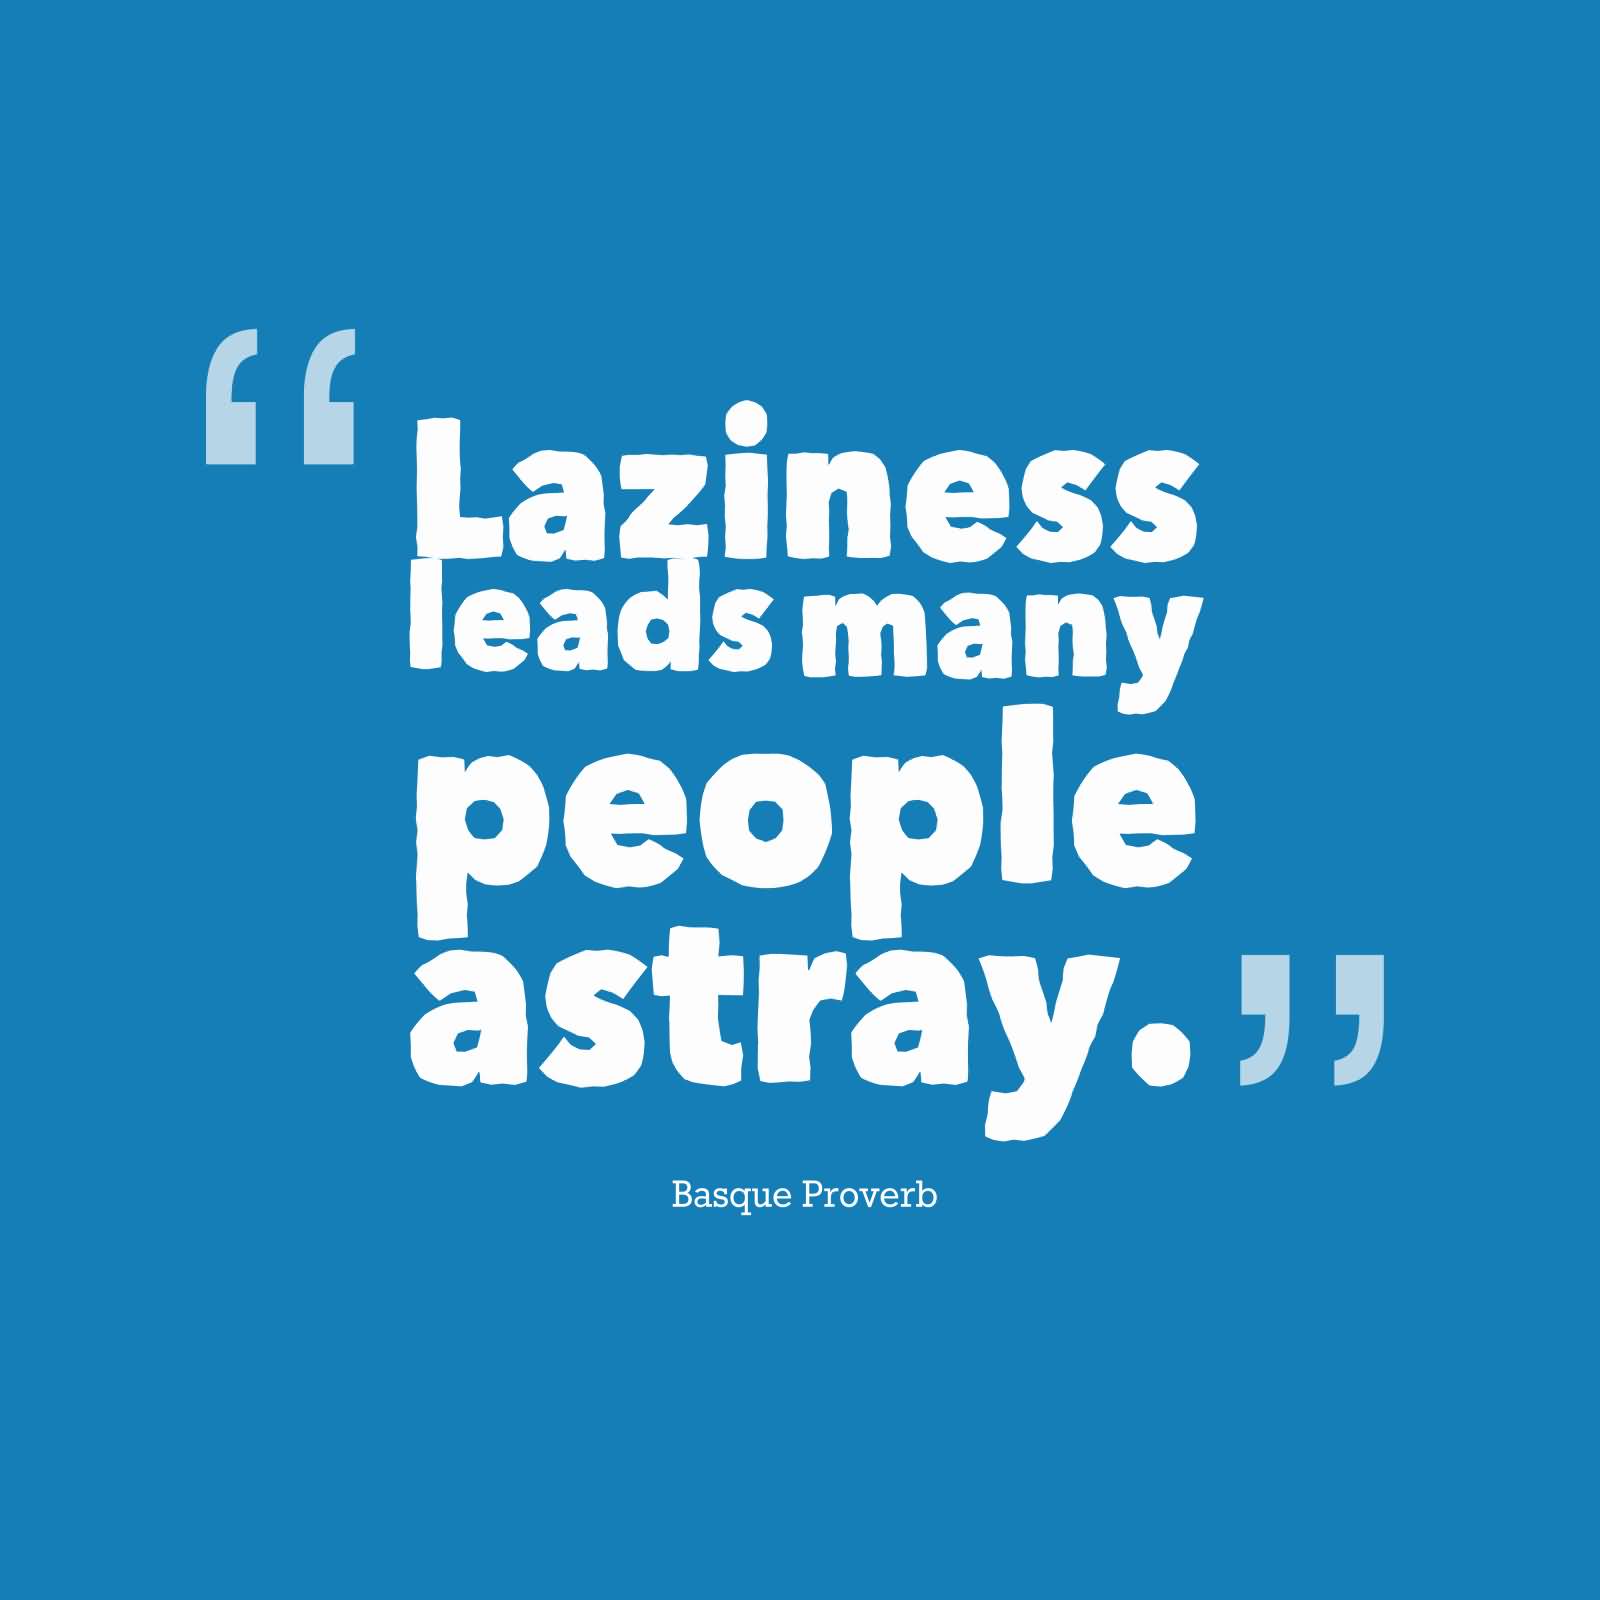 60 Best Laziness Quotes And Sayings For Inspiration